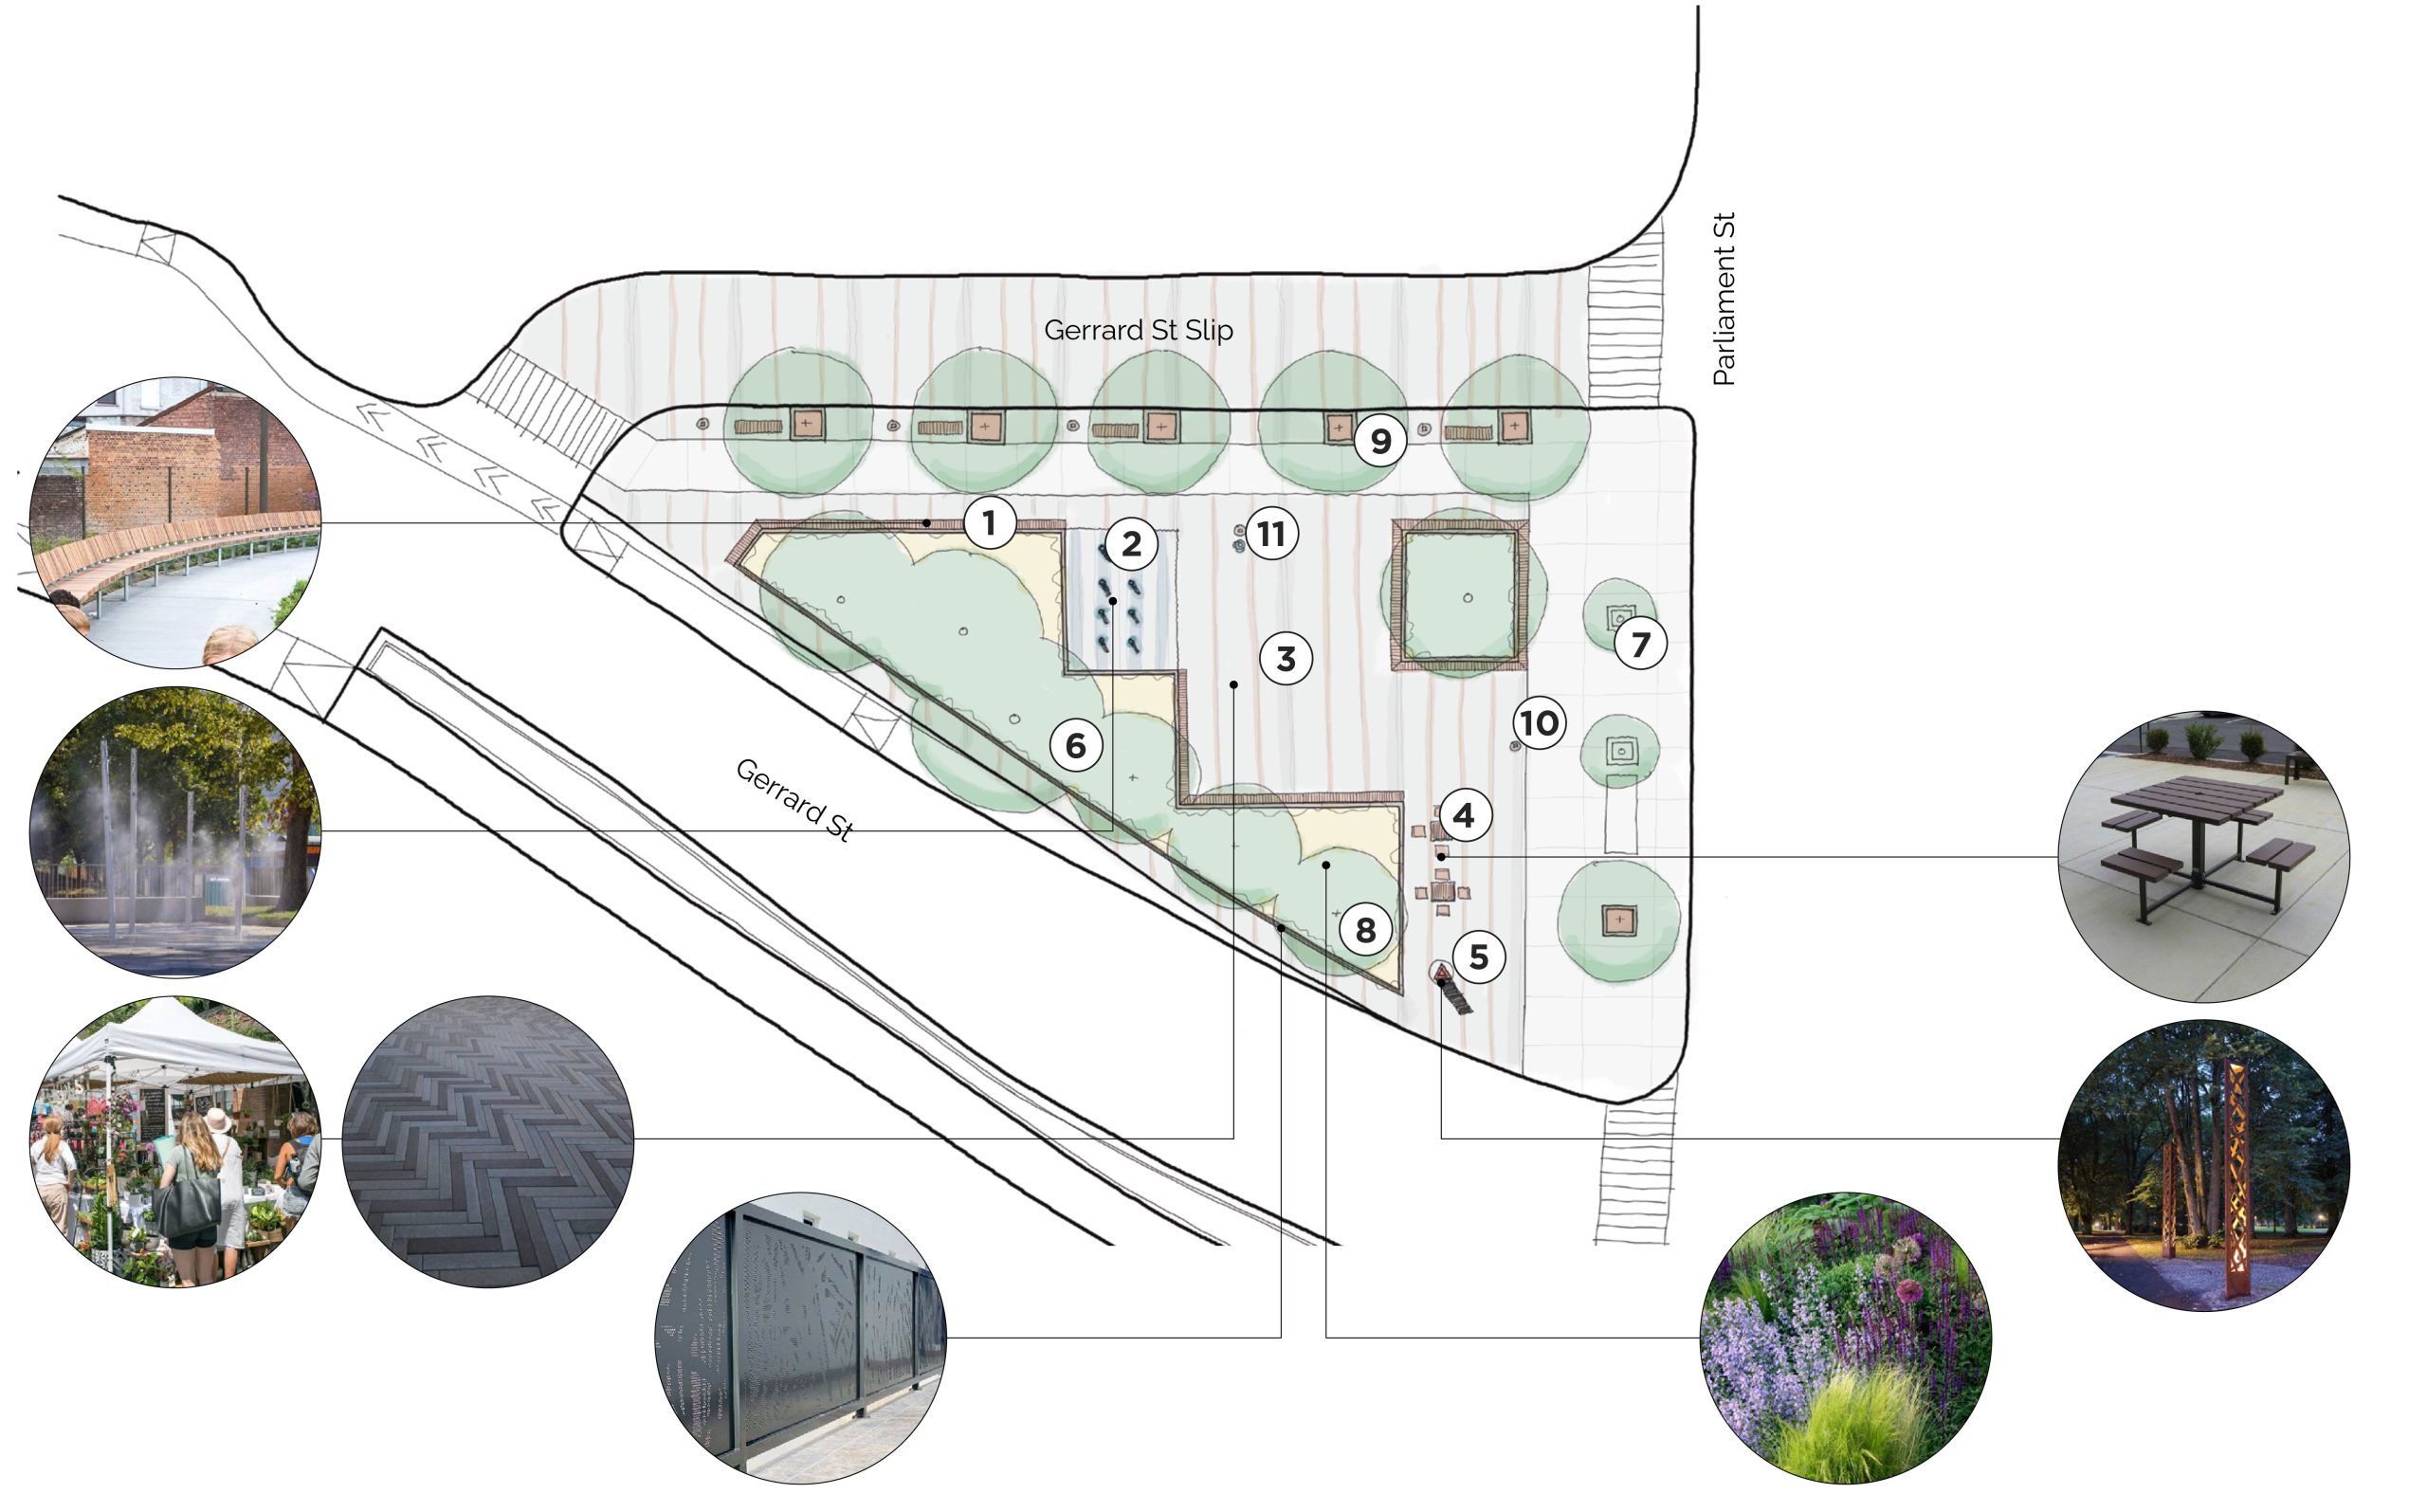 The image shows design option 1 for the revitalized Anniversary Park. It has an angular-linear form along the south side of the site. There is a water feature in the center of the site, and it is open to both the Gerrard Slip Lane and Parliament Street.